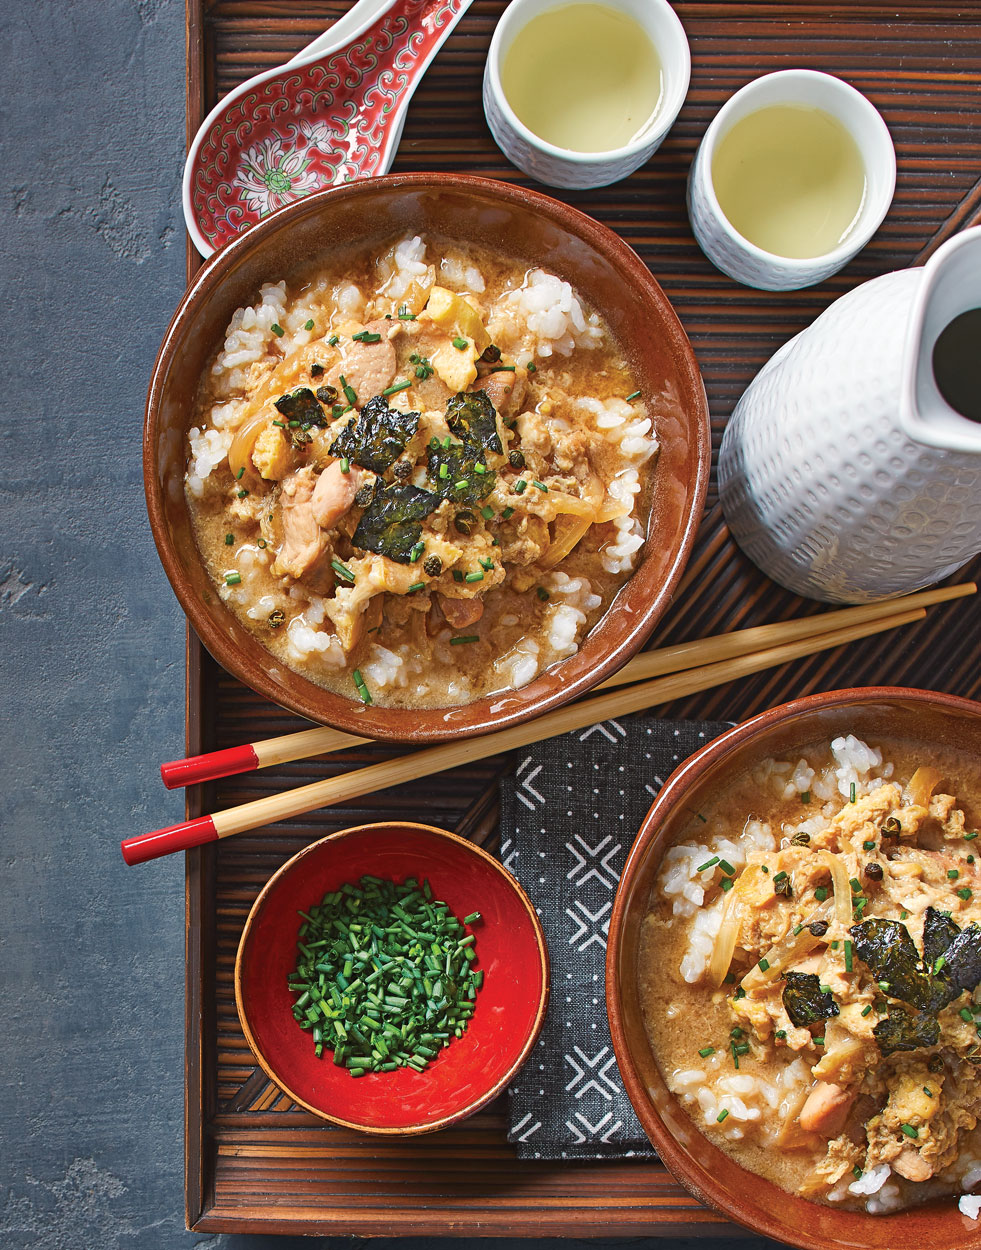 Oyakodon (Poached Chicken and Egg in Dashi and Soy Broth)